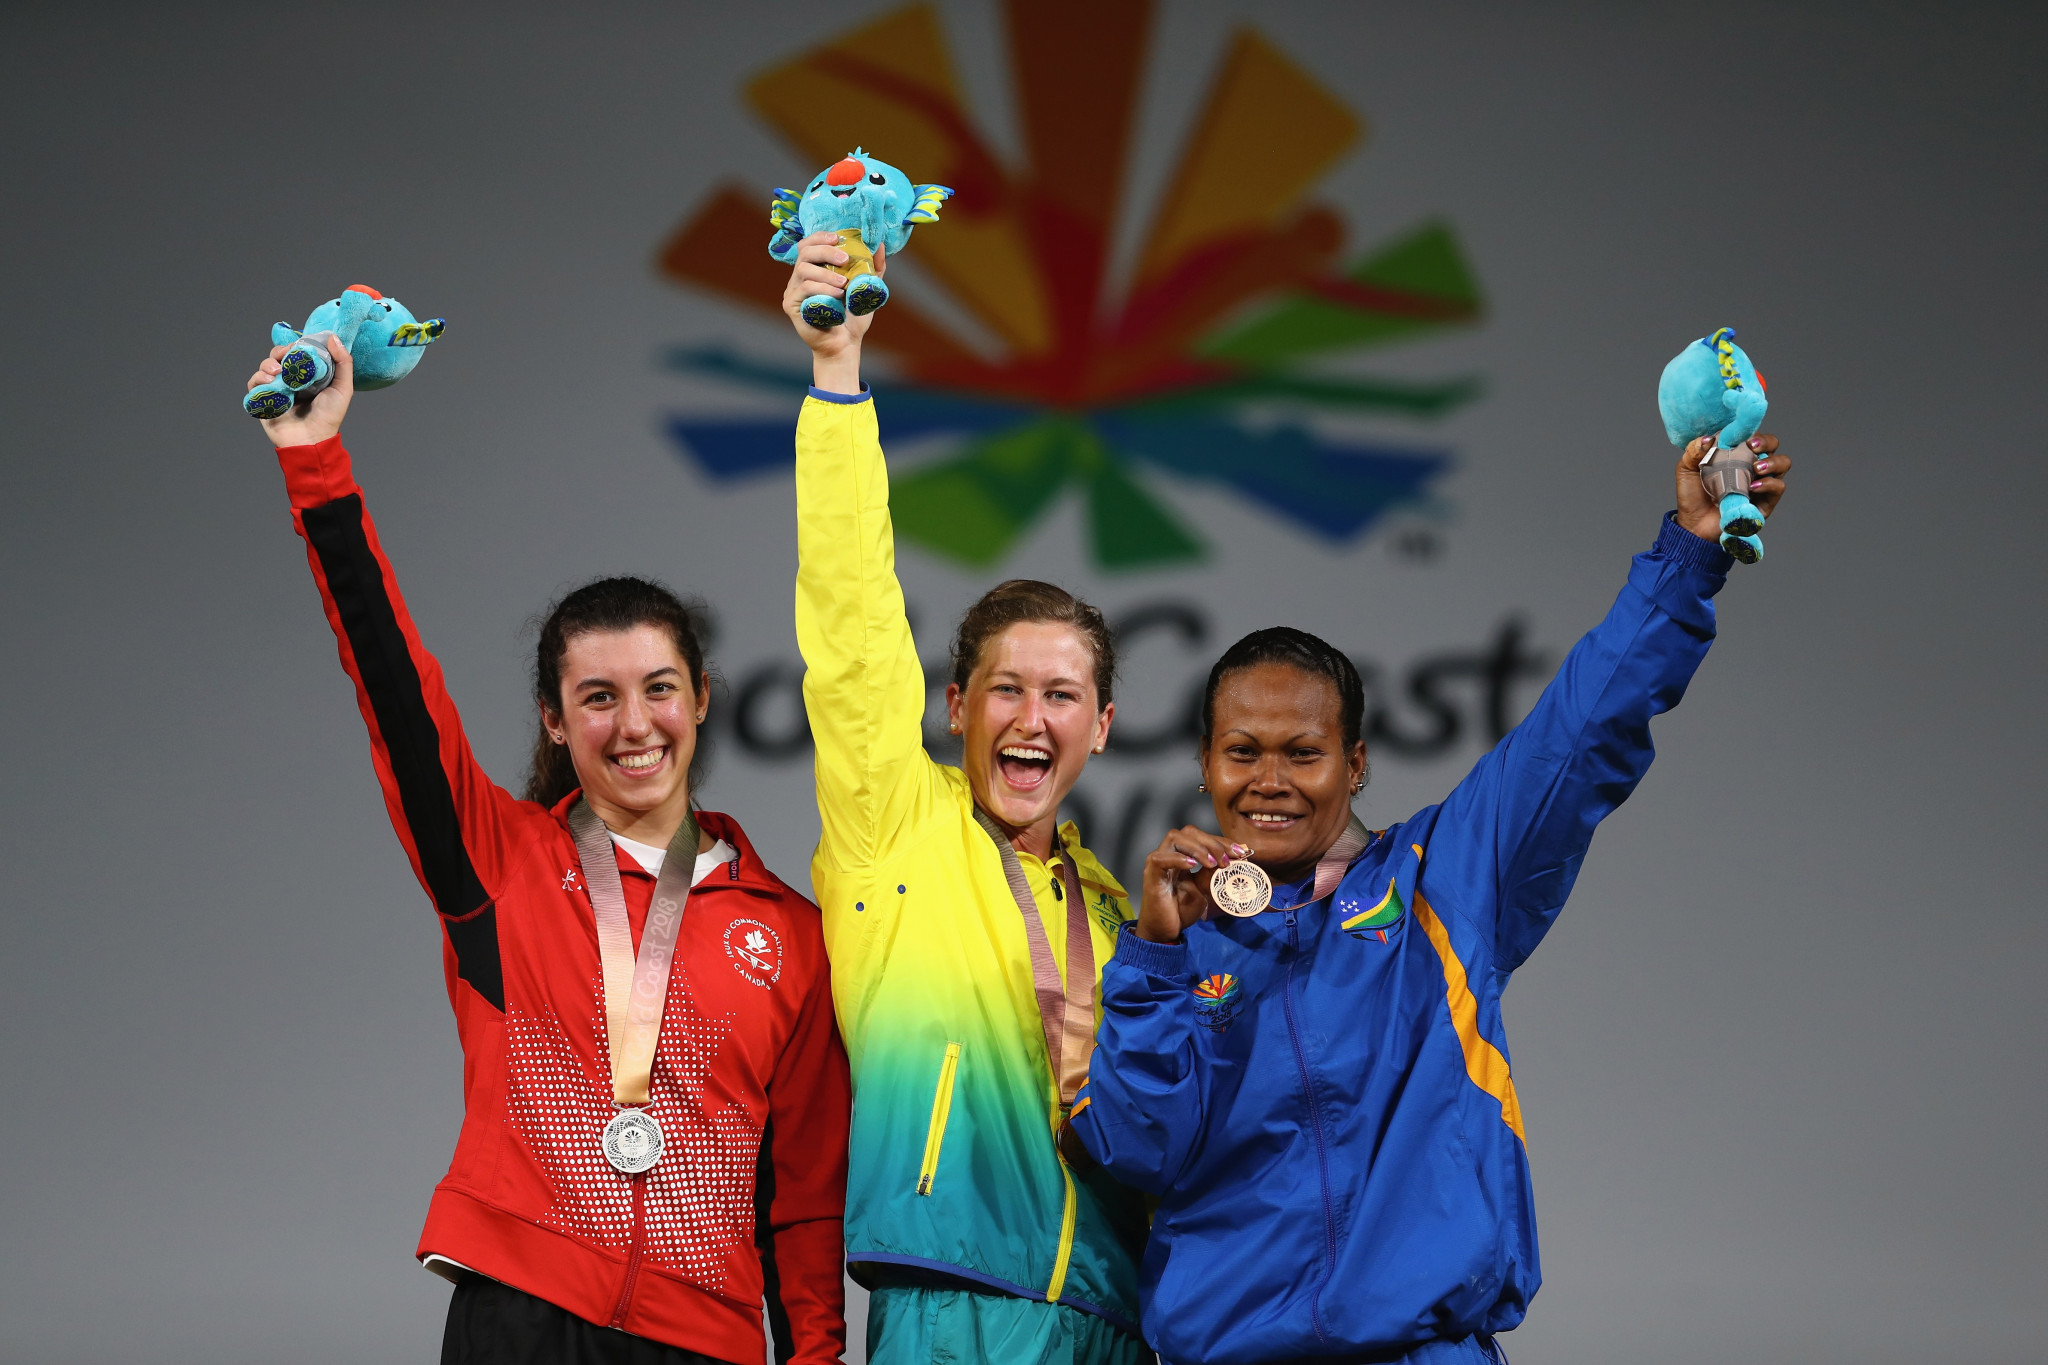 She was joined on the podium by Canada's Tali Darsigny and Solomon Islands' Jenly Winly, whose bronze was her country's first-ever medal at the Commonwealth Games ©Getty Images